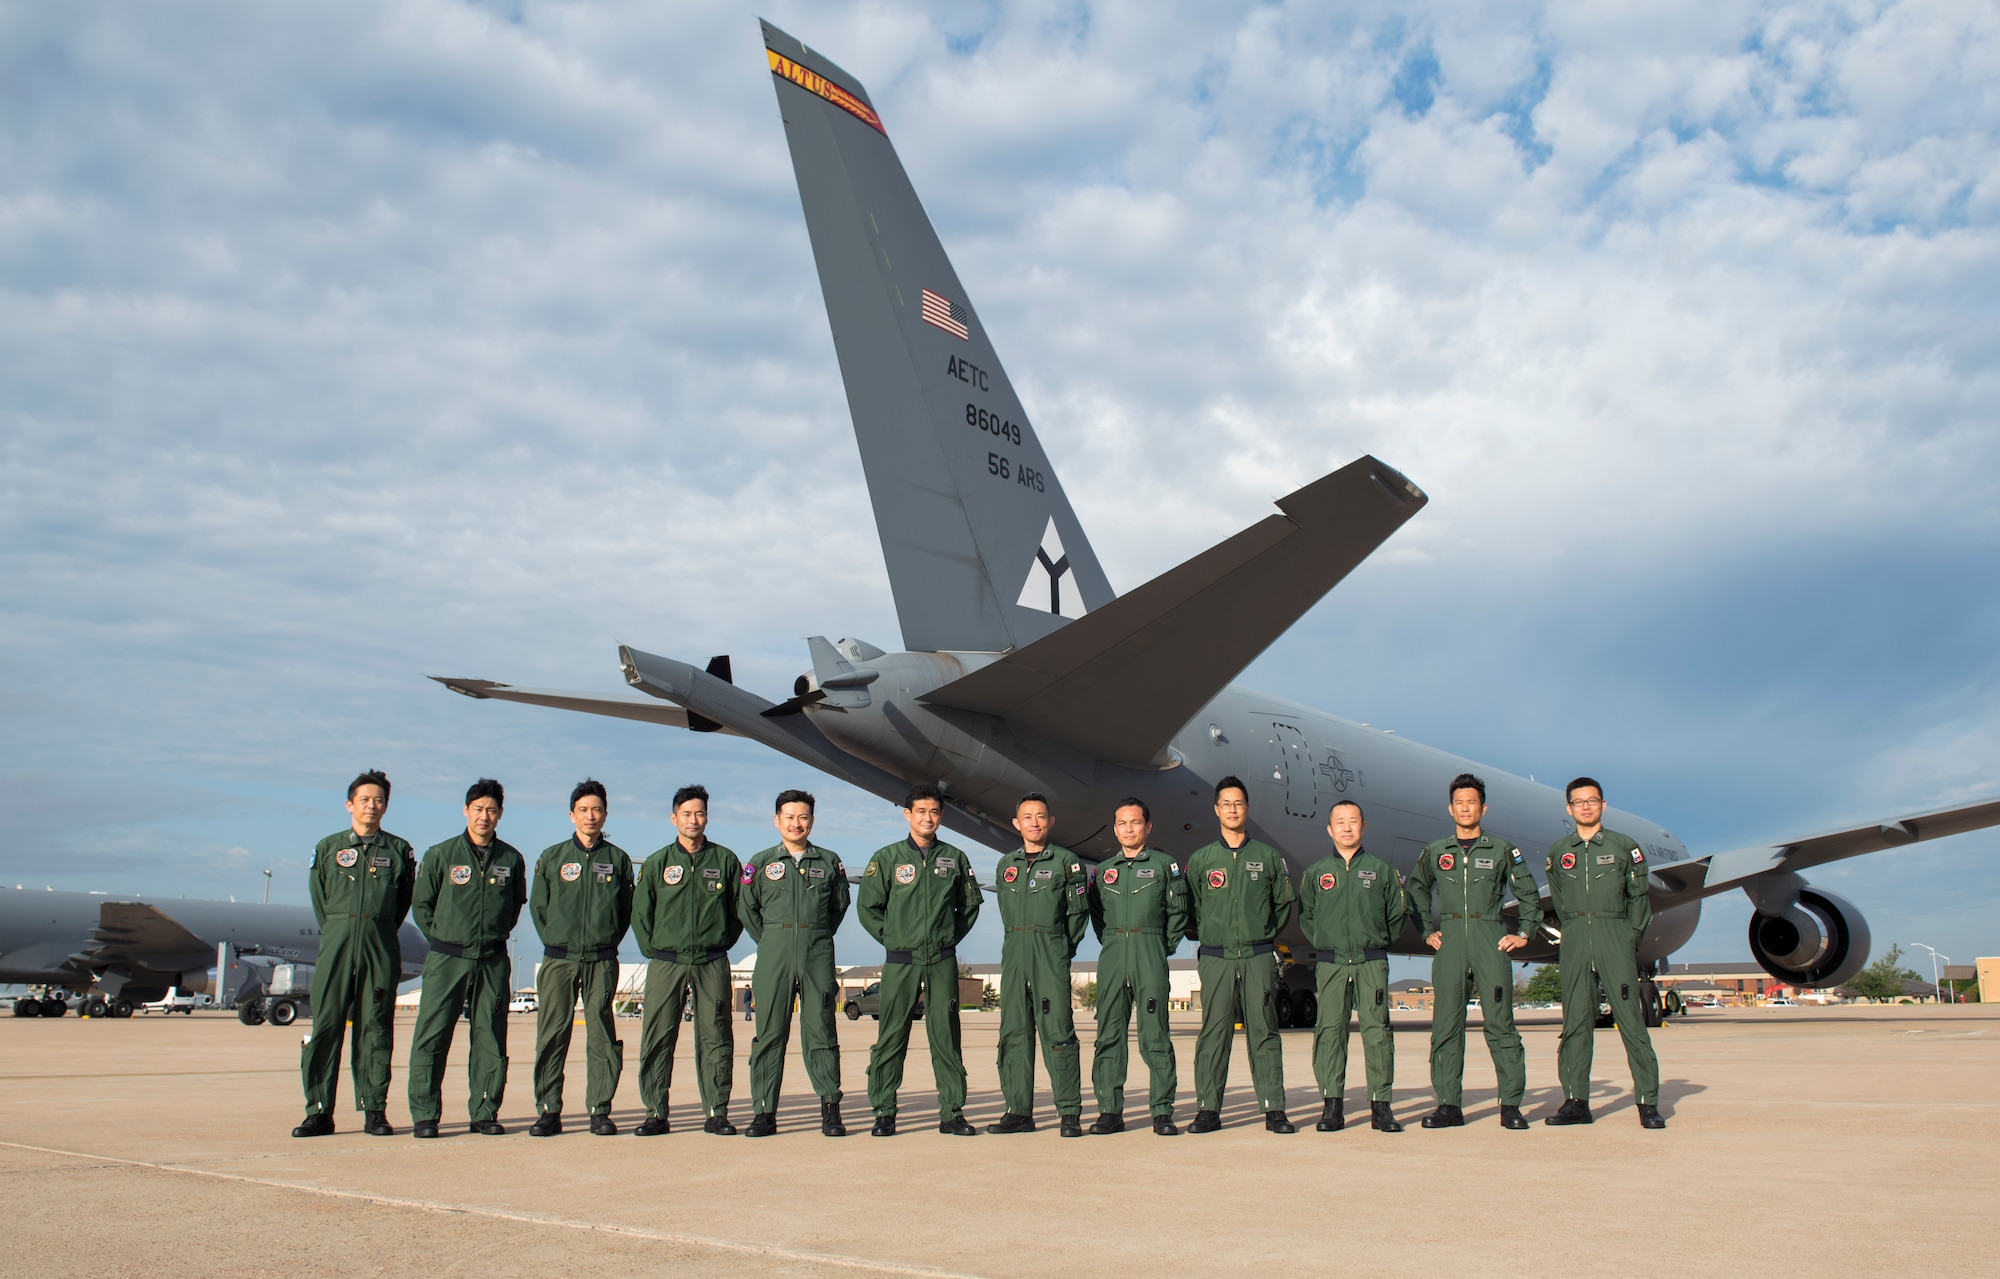 Japanese aircrew students pose for a photo in front of a KC-46 Pegasus, May 12, 2021, at Altus Air Force Base, Oklahoma. The students are Japan Air Self-Defense Force pilots and boom operators who came to Mobility’s Hometown to train on the KC-46. (U.S. Air Force photo by Airman 1st Class Amanda Lovelace)